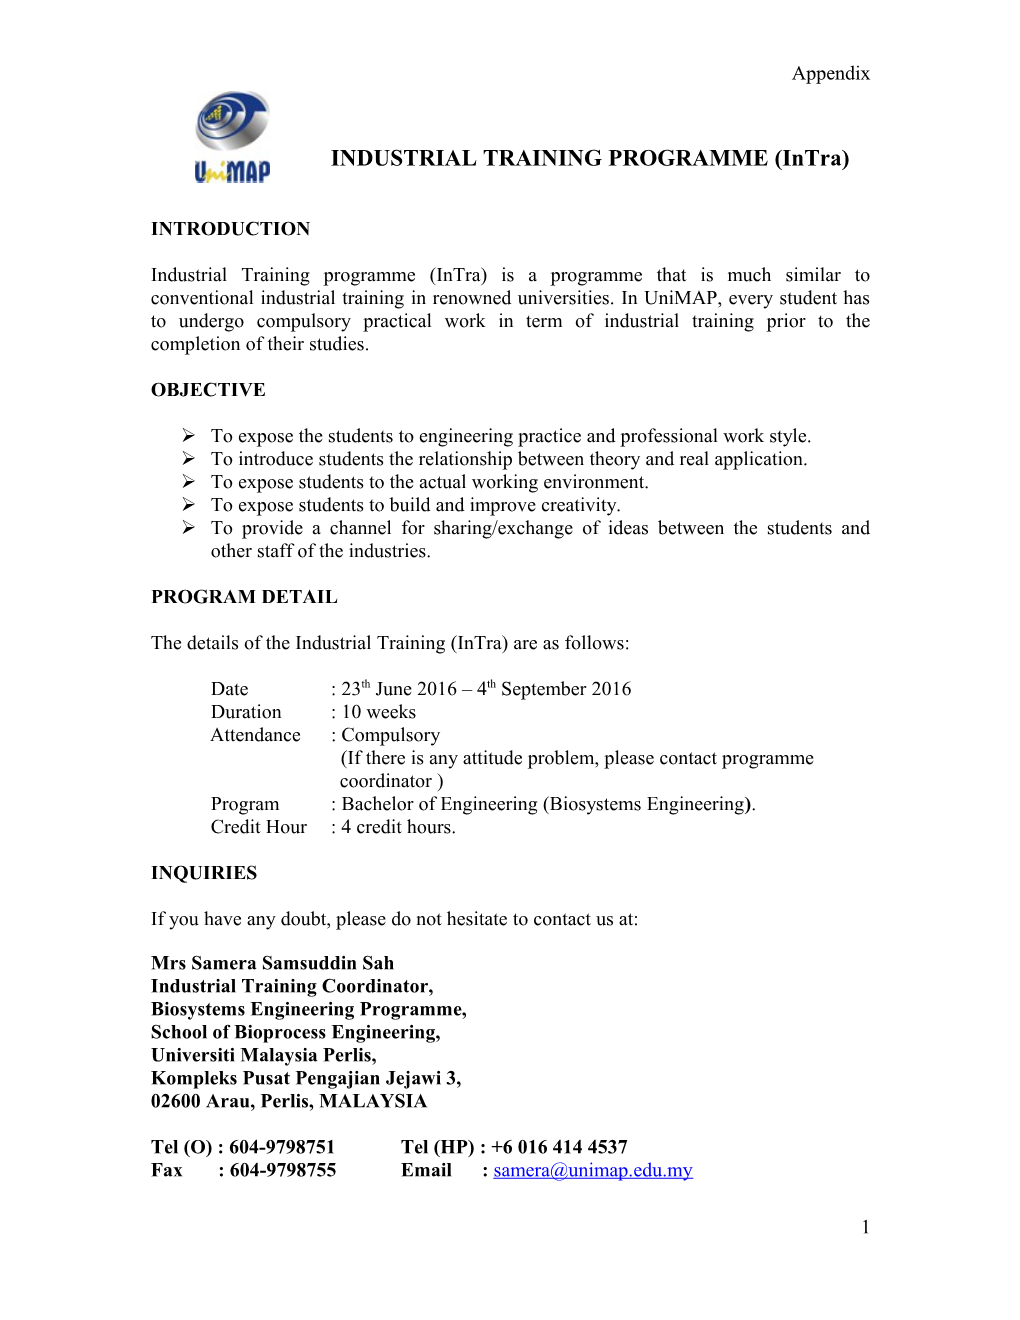 INDUSTRIAL TRAINING PROGRAMME (Intra)